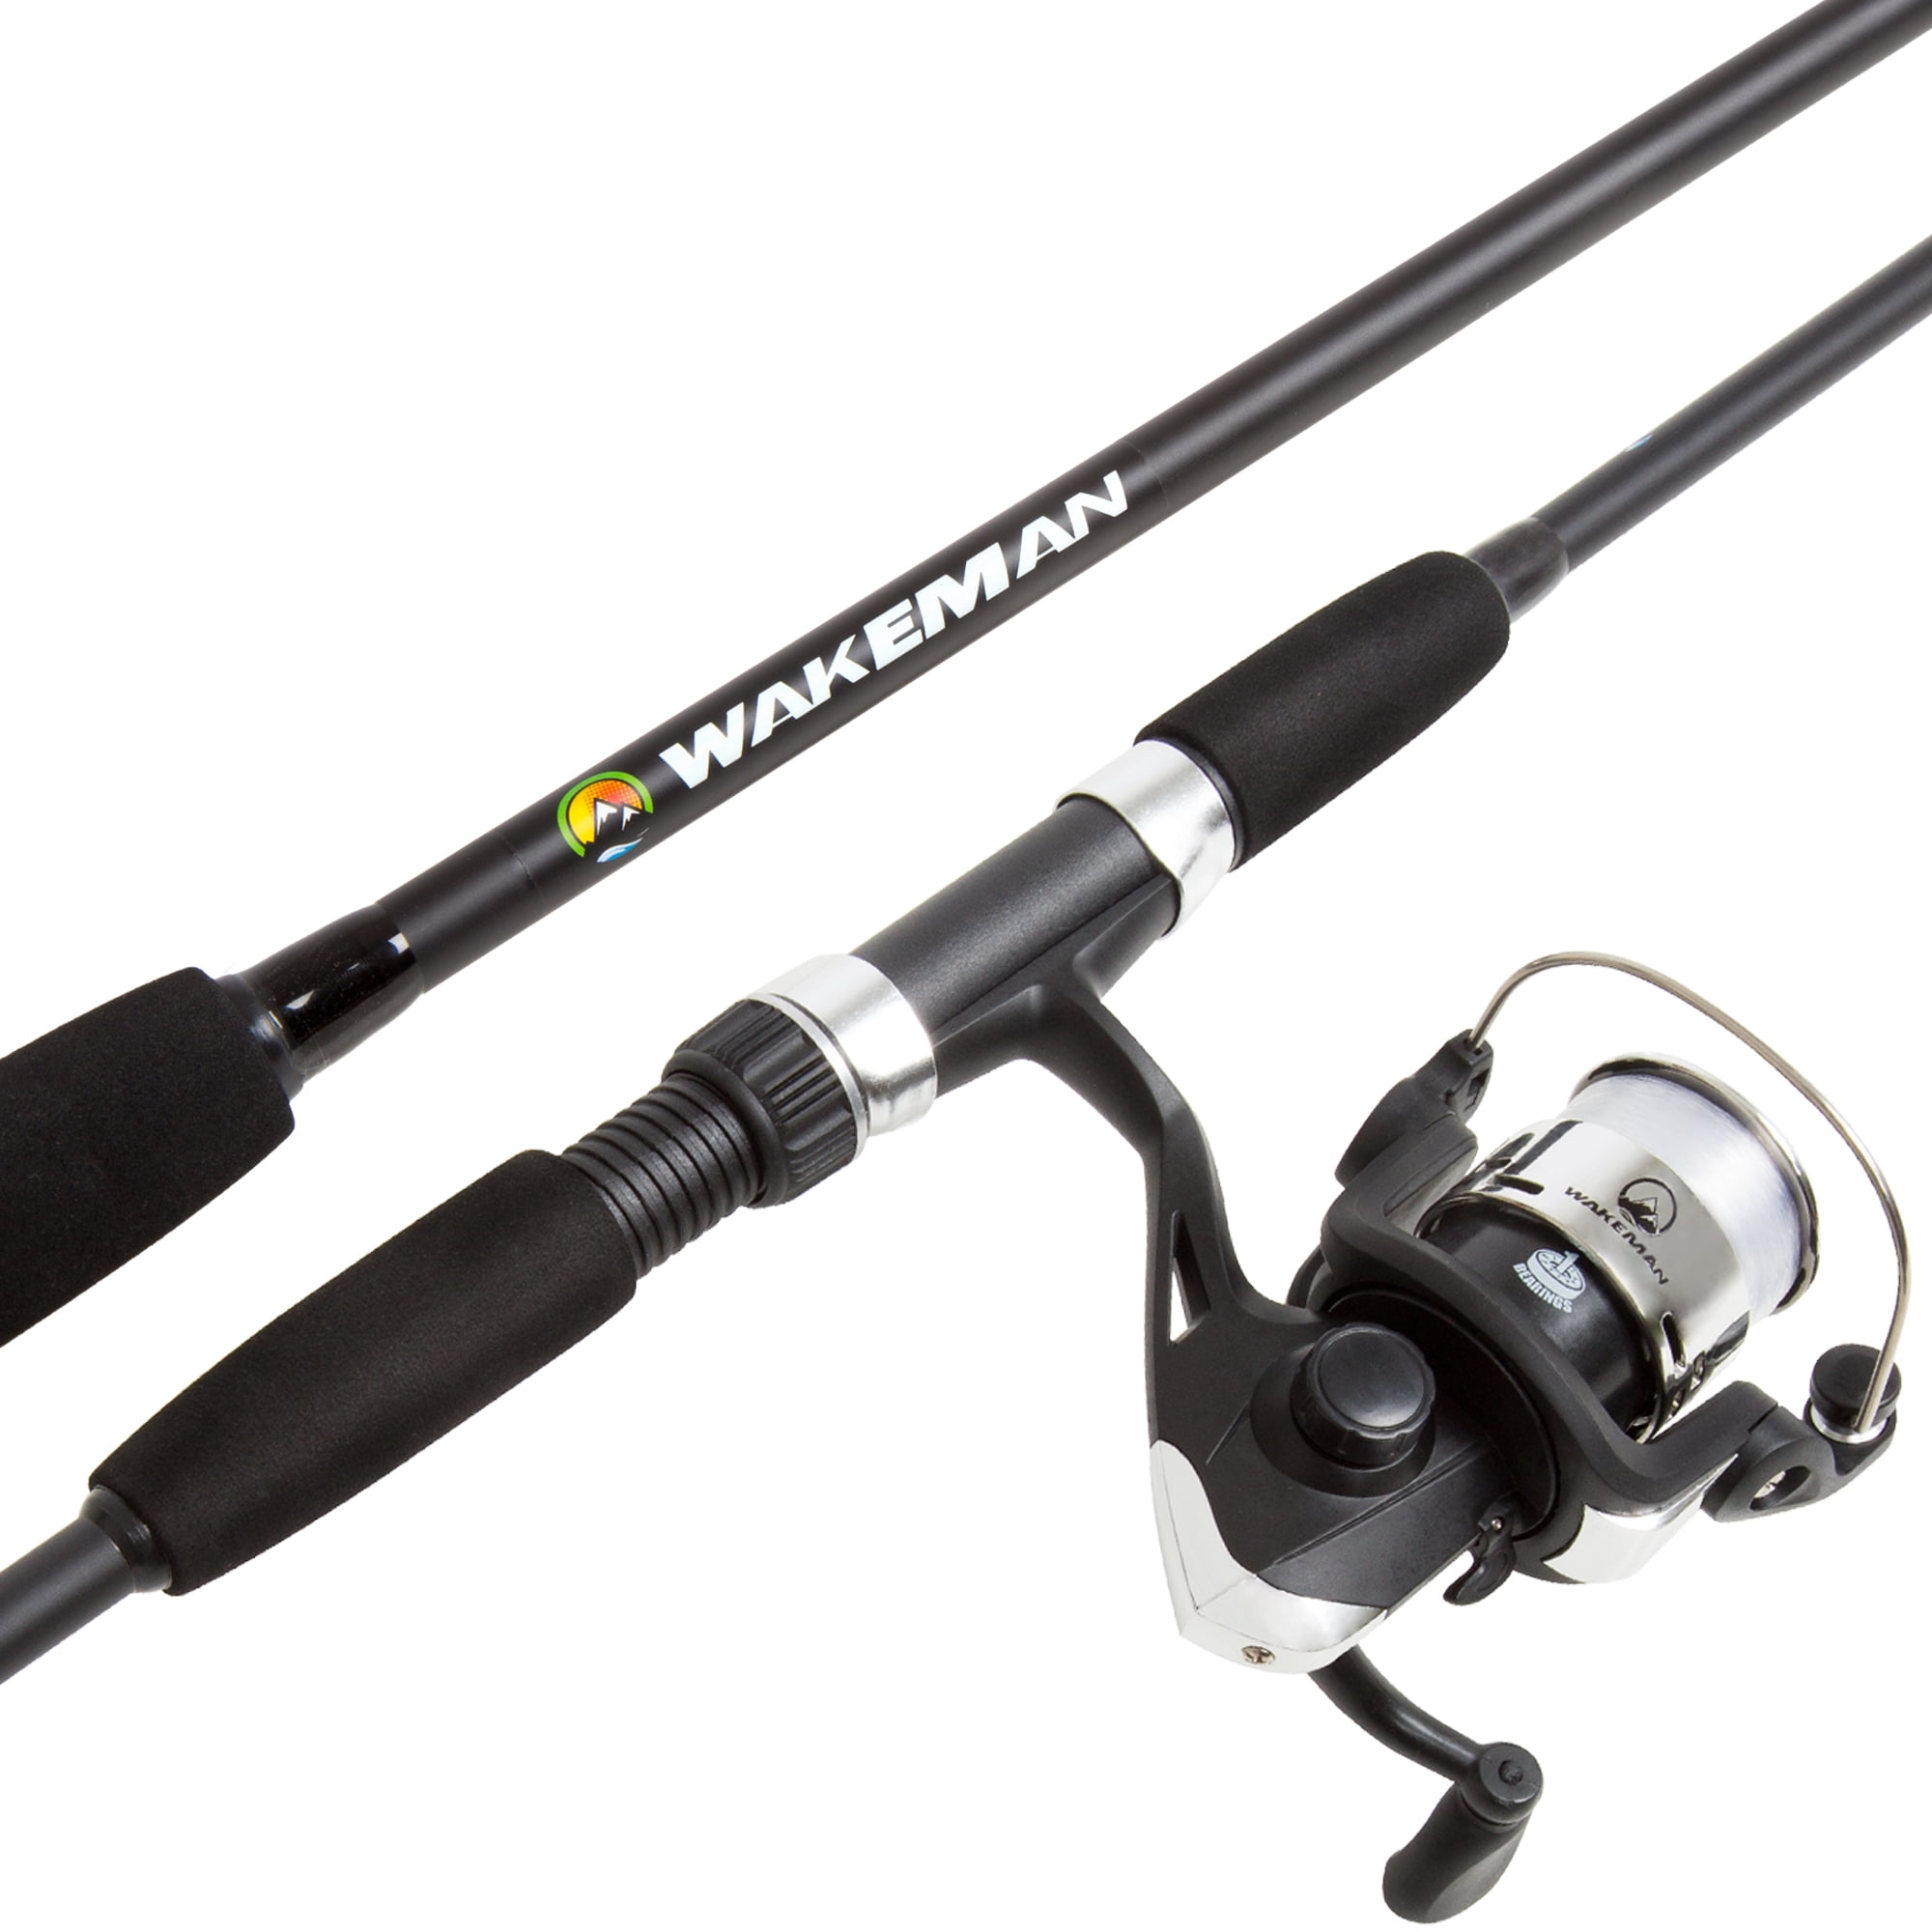 Fishing Rod and Reel Combo, Spinning Reel, Fishing Gear for Bass and Trout  Fishing, Great for Kids, Black - Swarm Series by Wakeman 